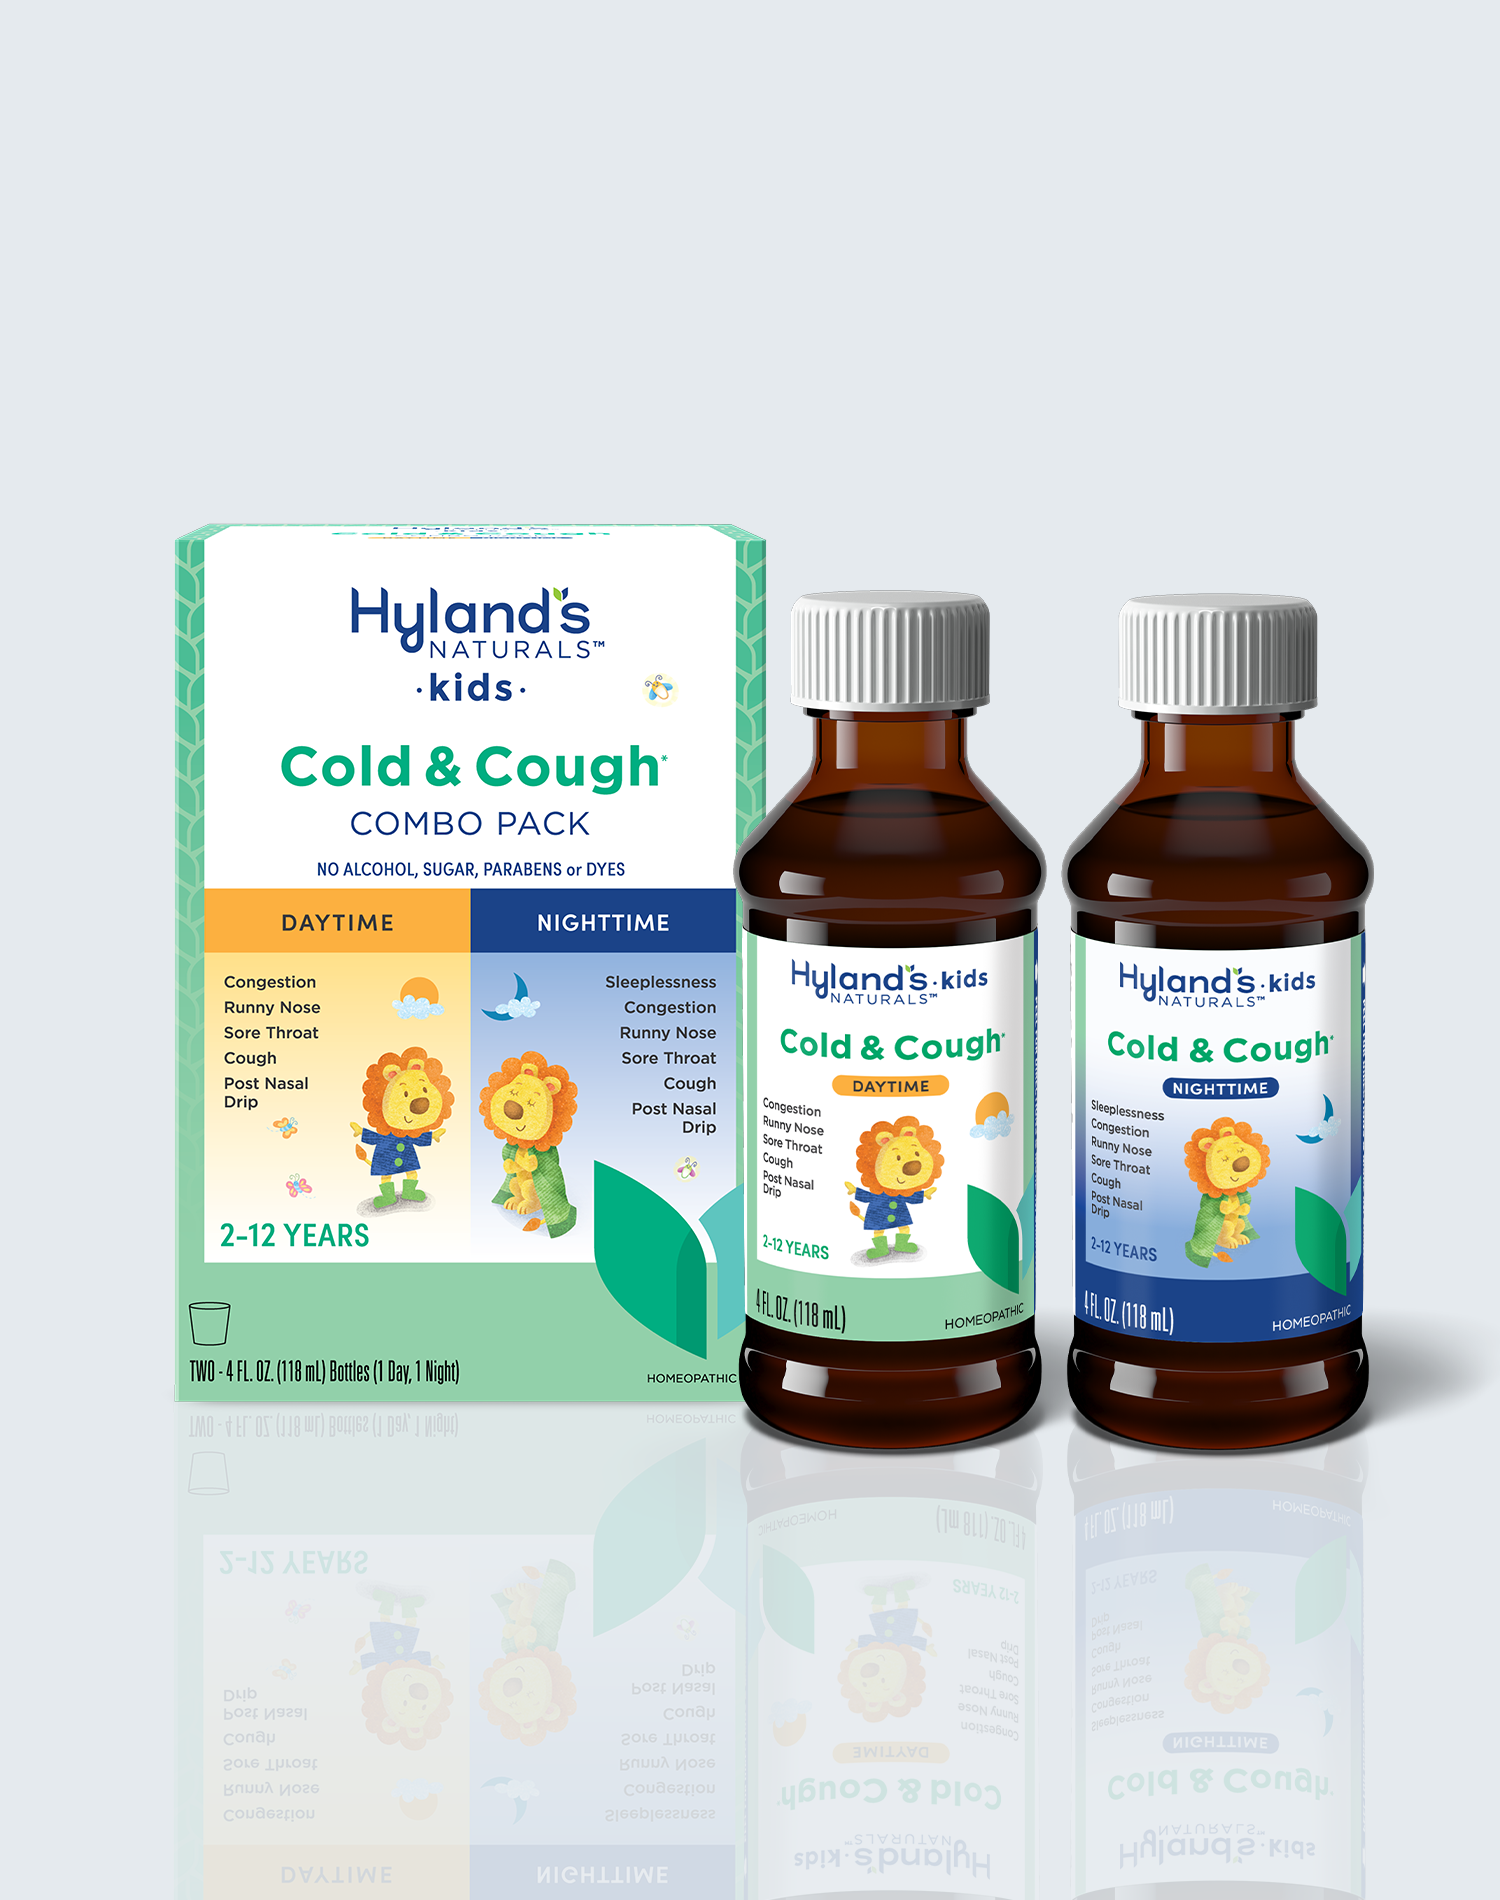 Cough & Cold Combo Pack Packaging